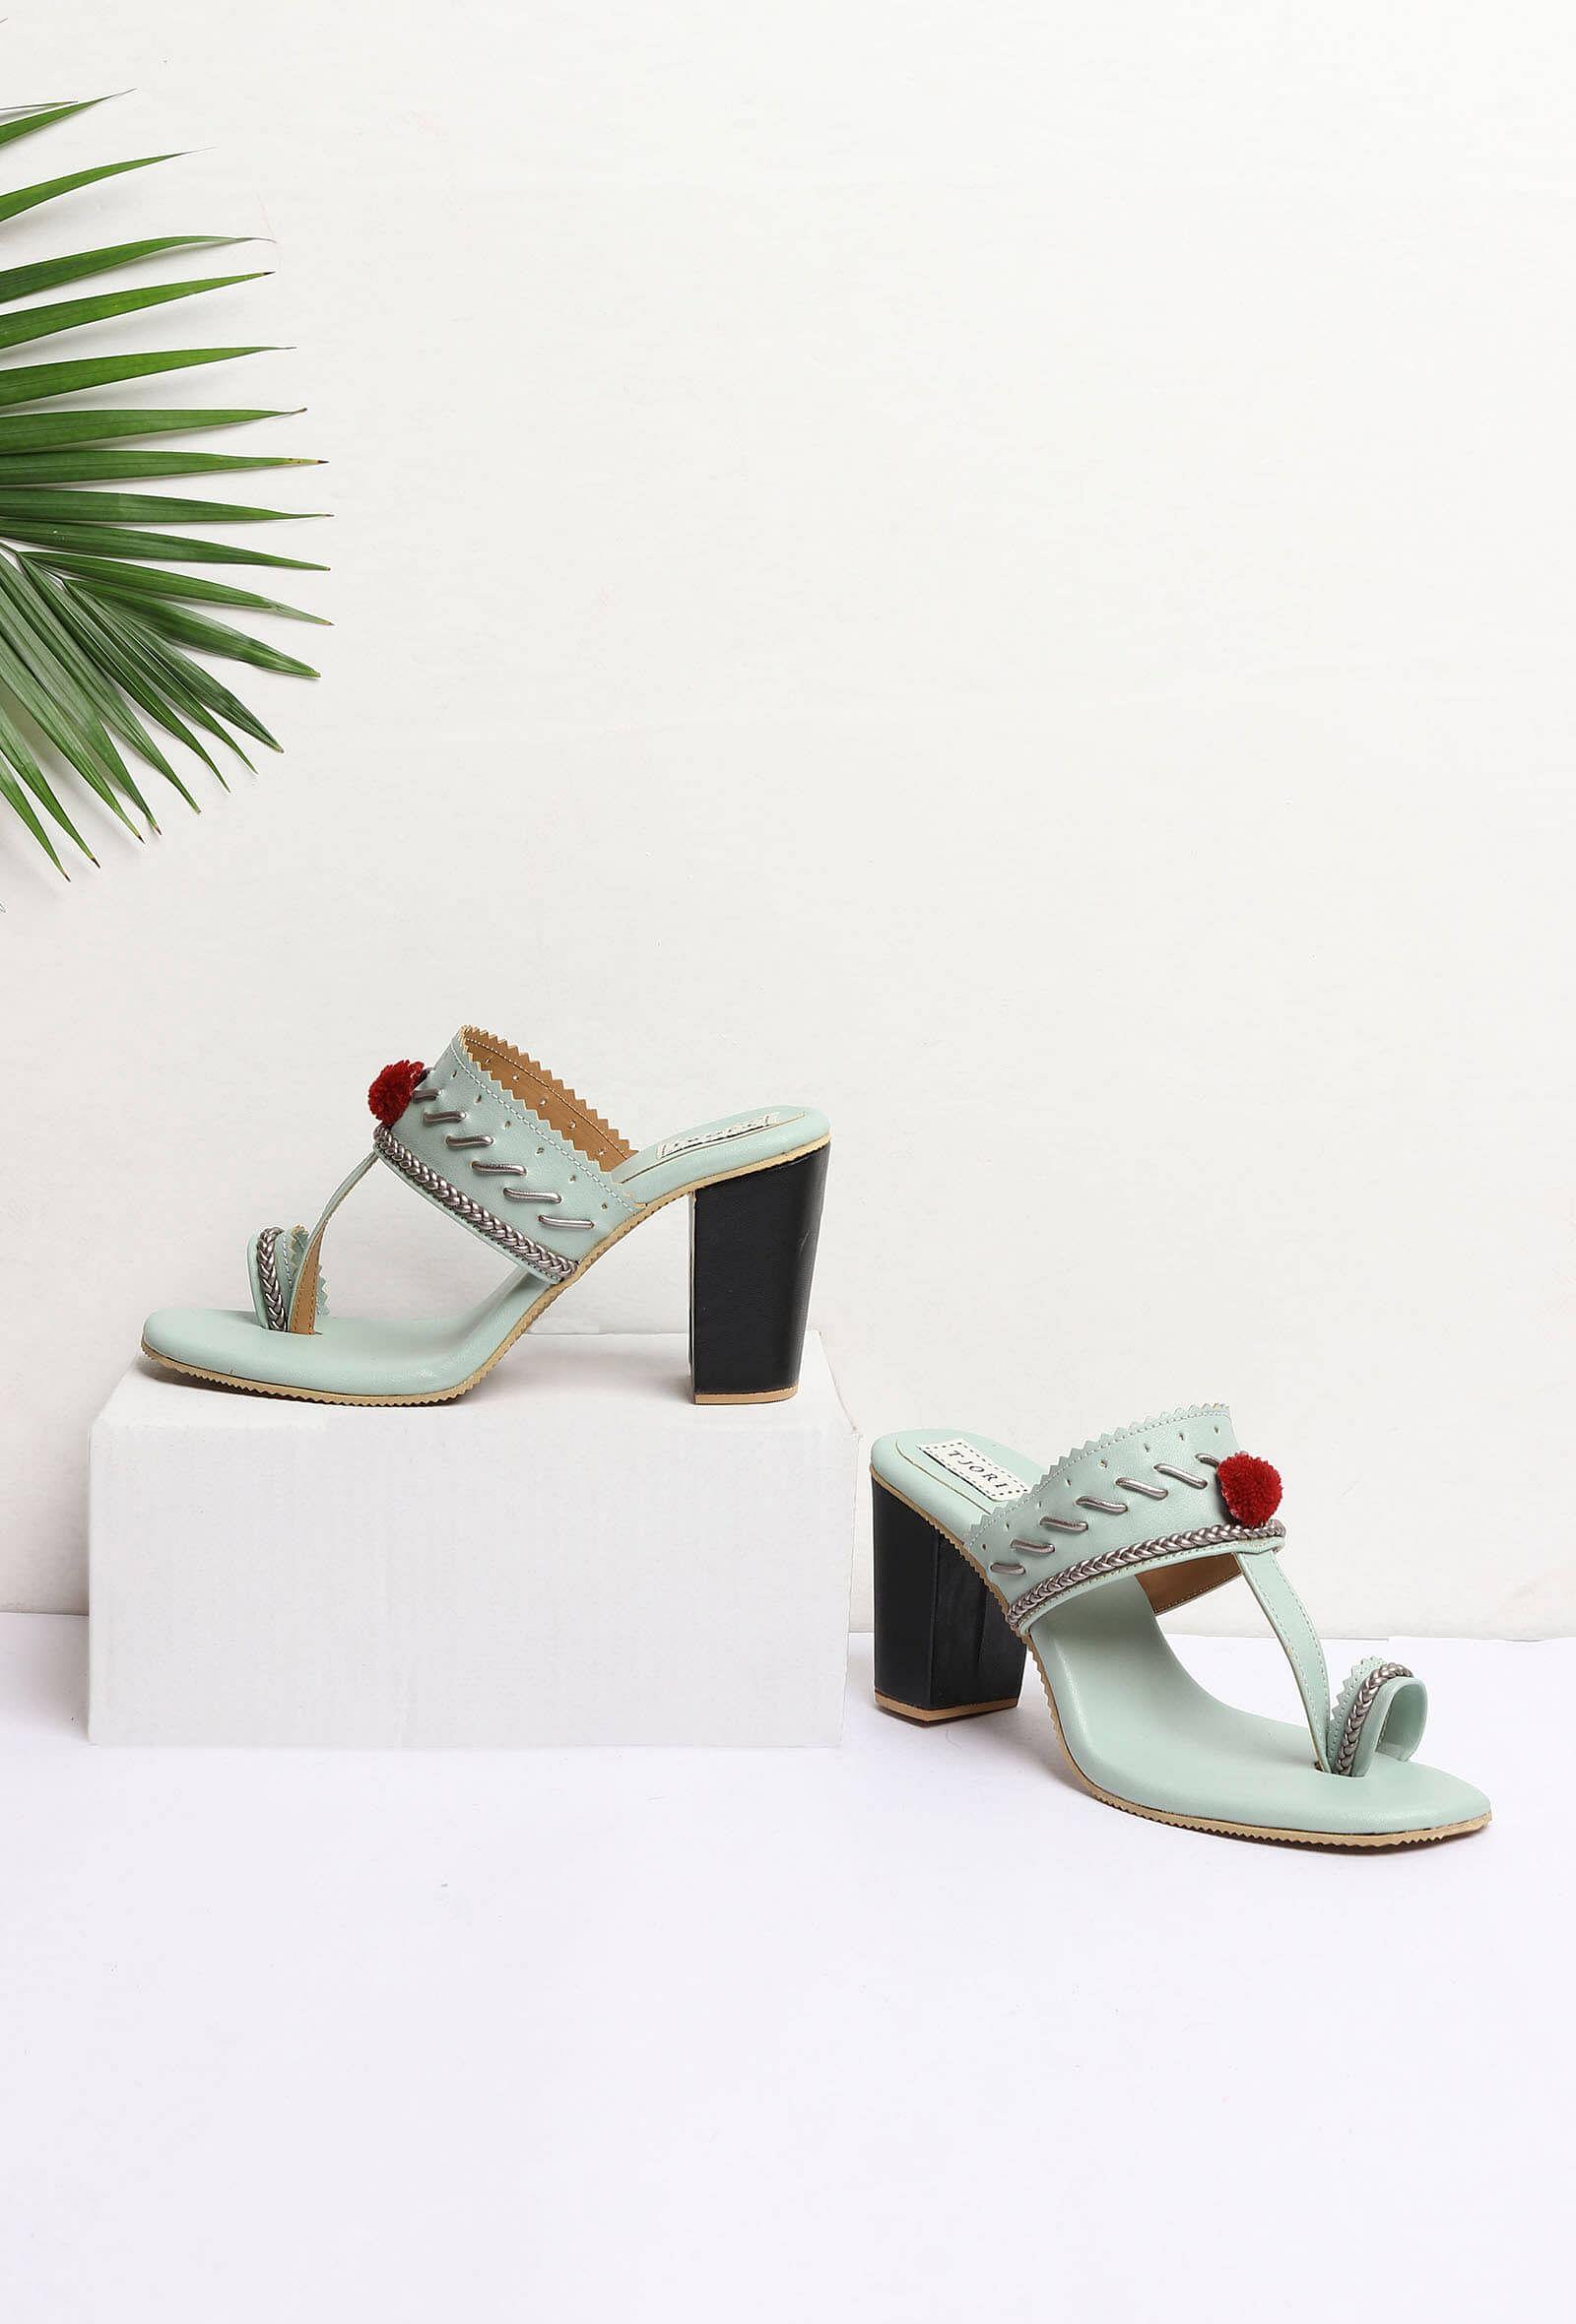 sea-green-cruelty-free-leather-sandals